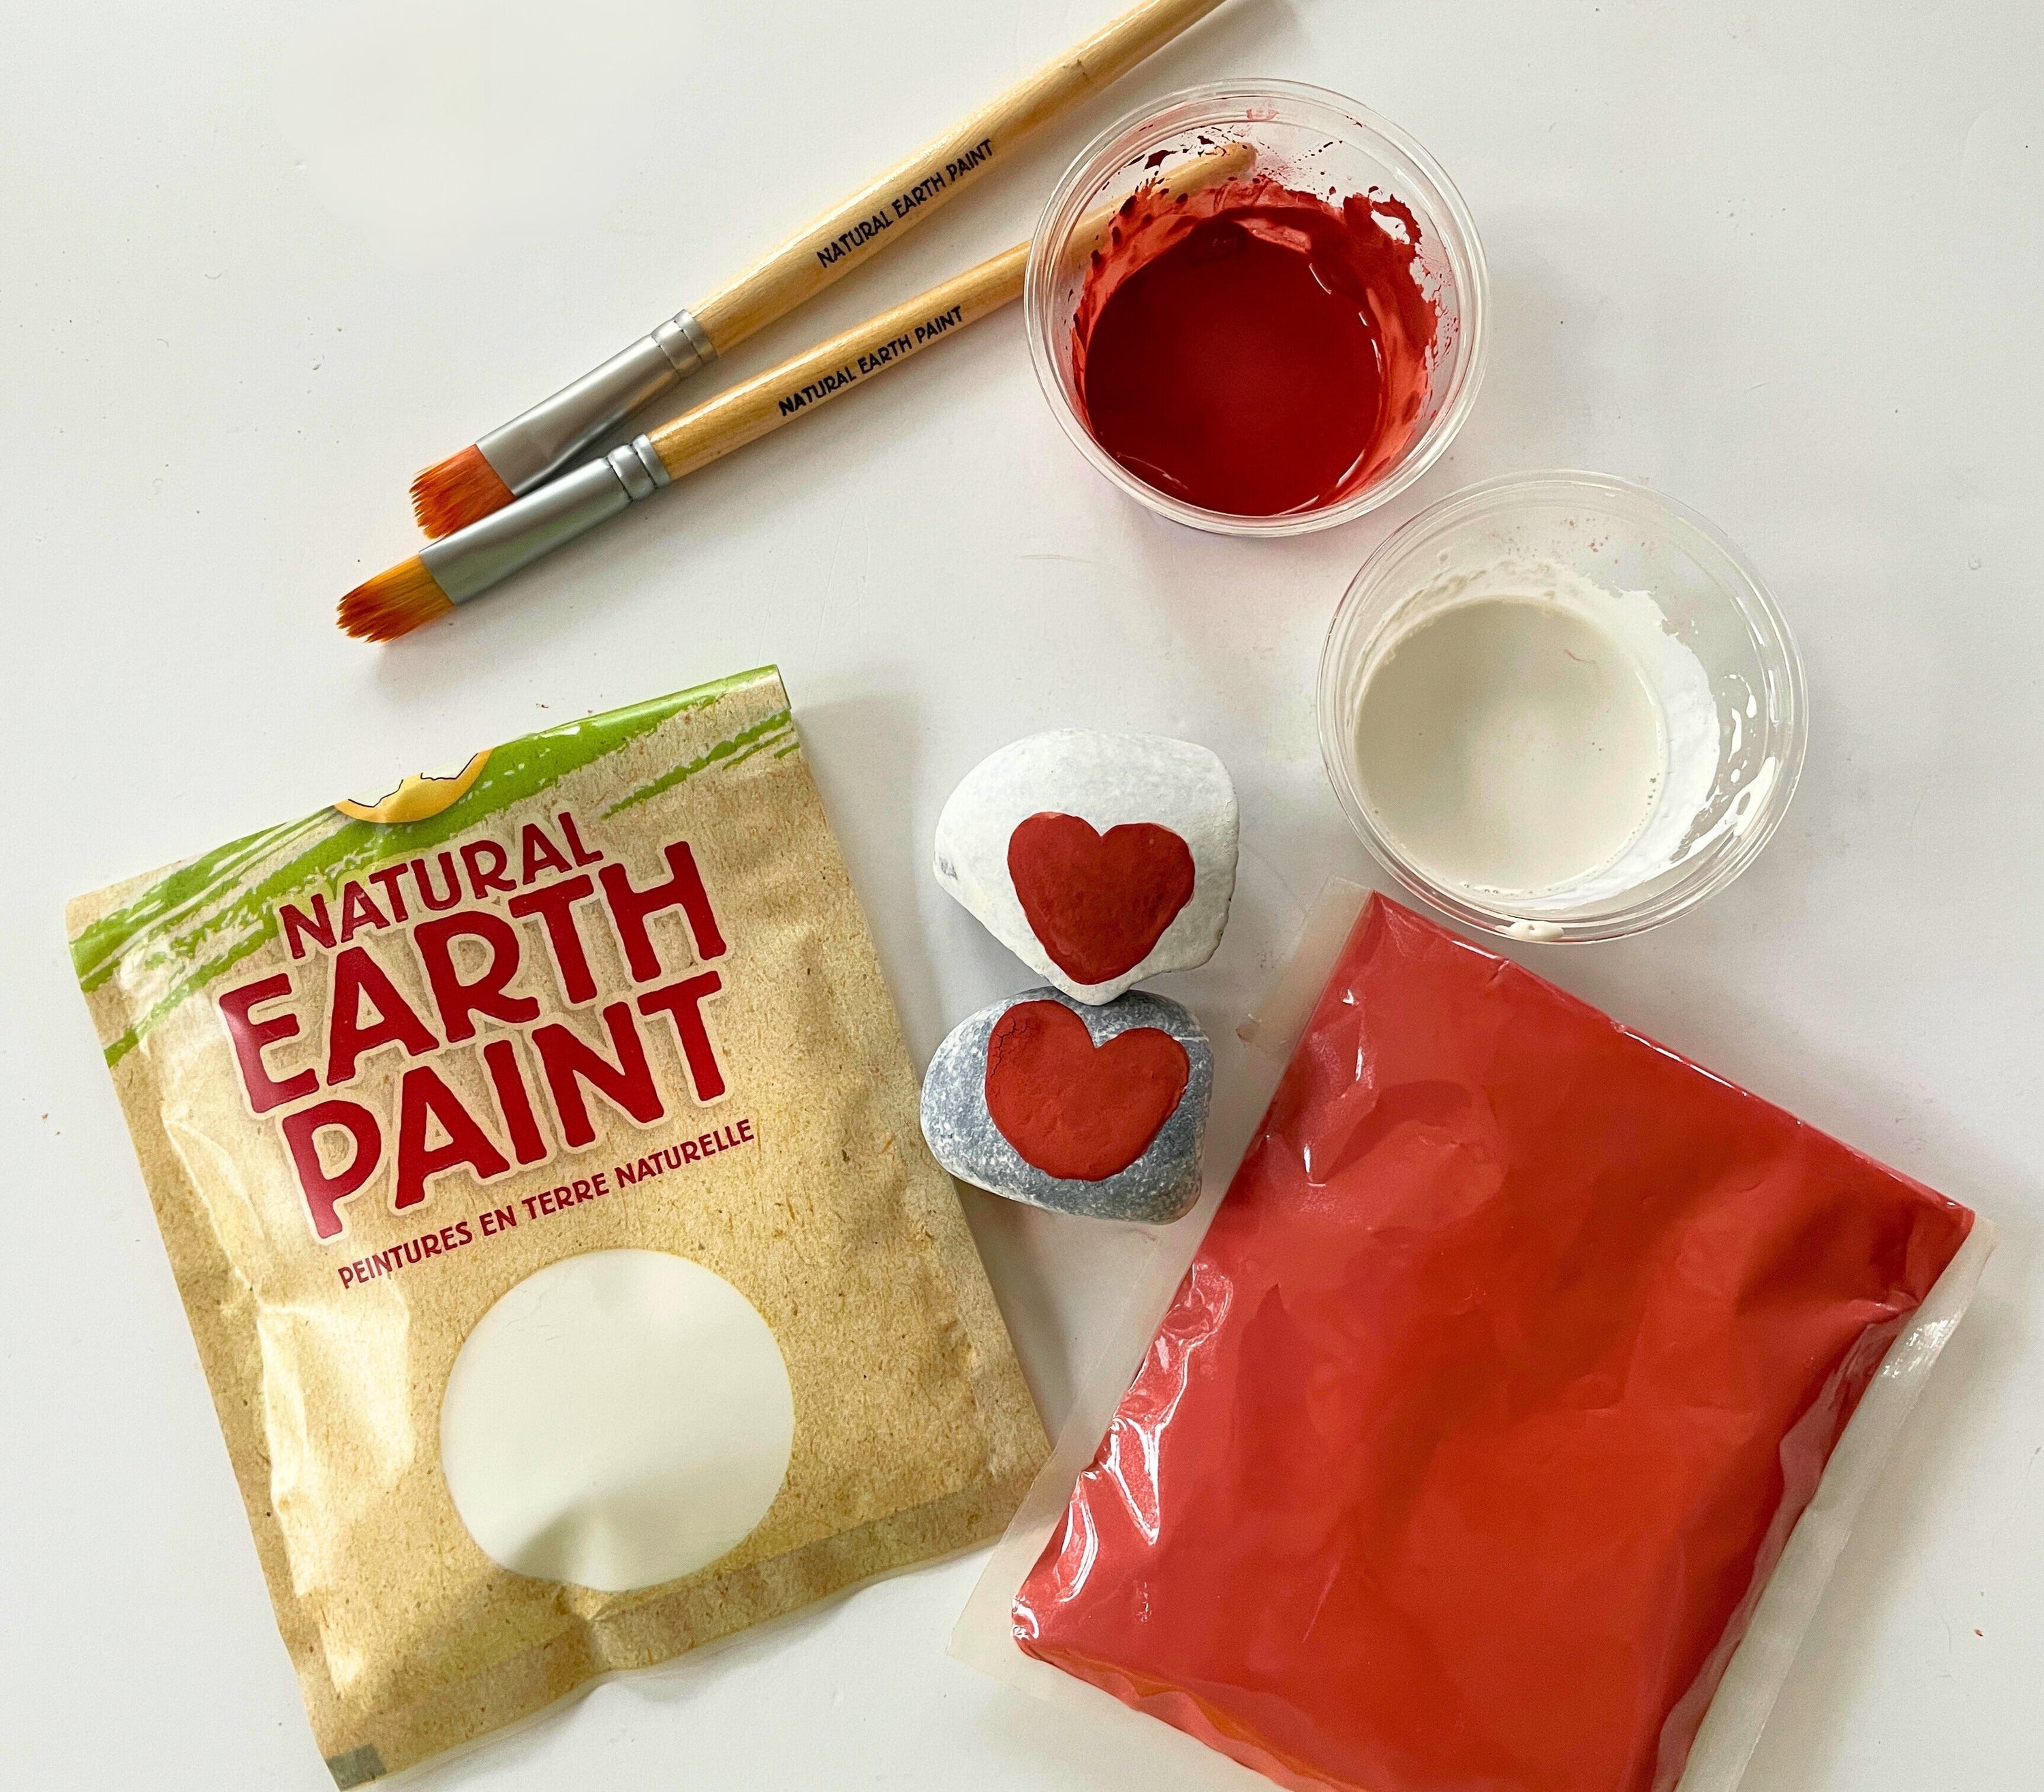 Natural Earth Paint pouches (red and white) with cups of paint, bamboo brushes, and two rocks painted with a red heart.